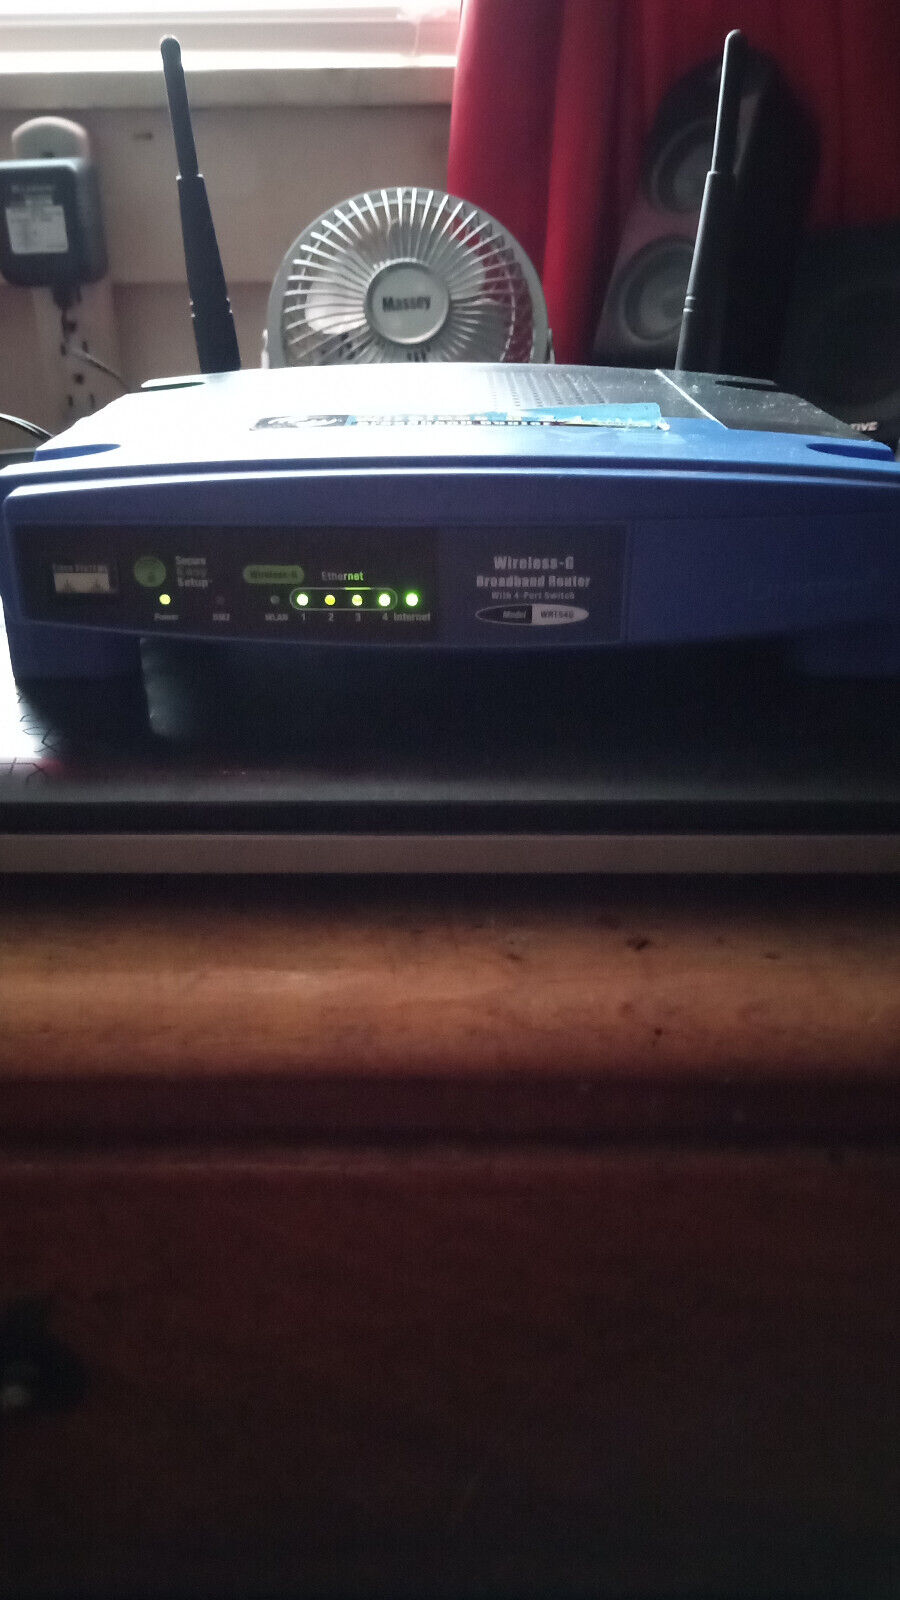 Linksys WRT54G Wireless G Router with 4-Port Switch